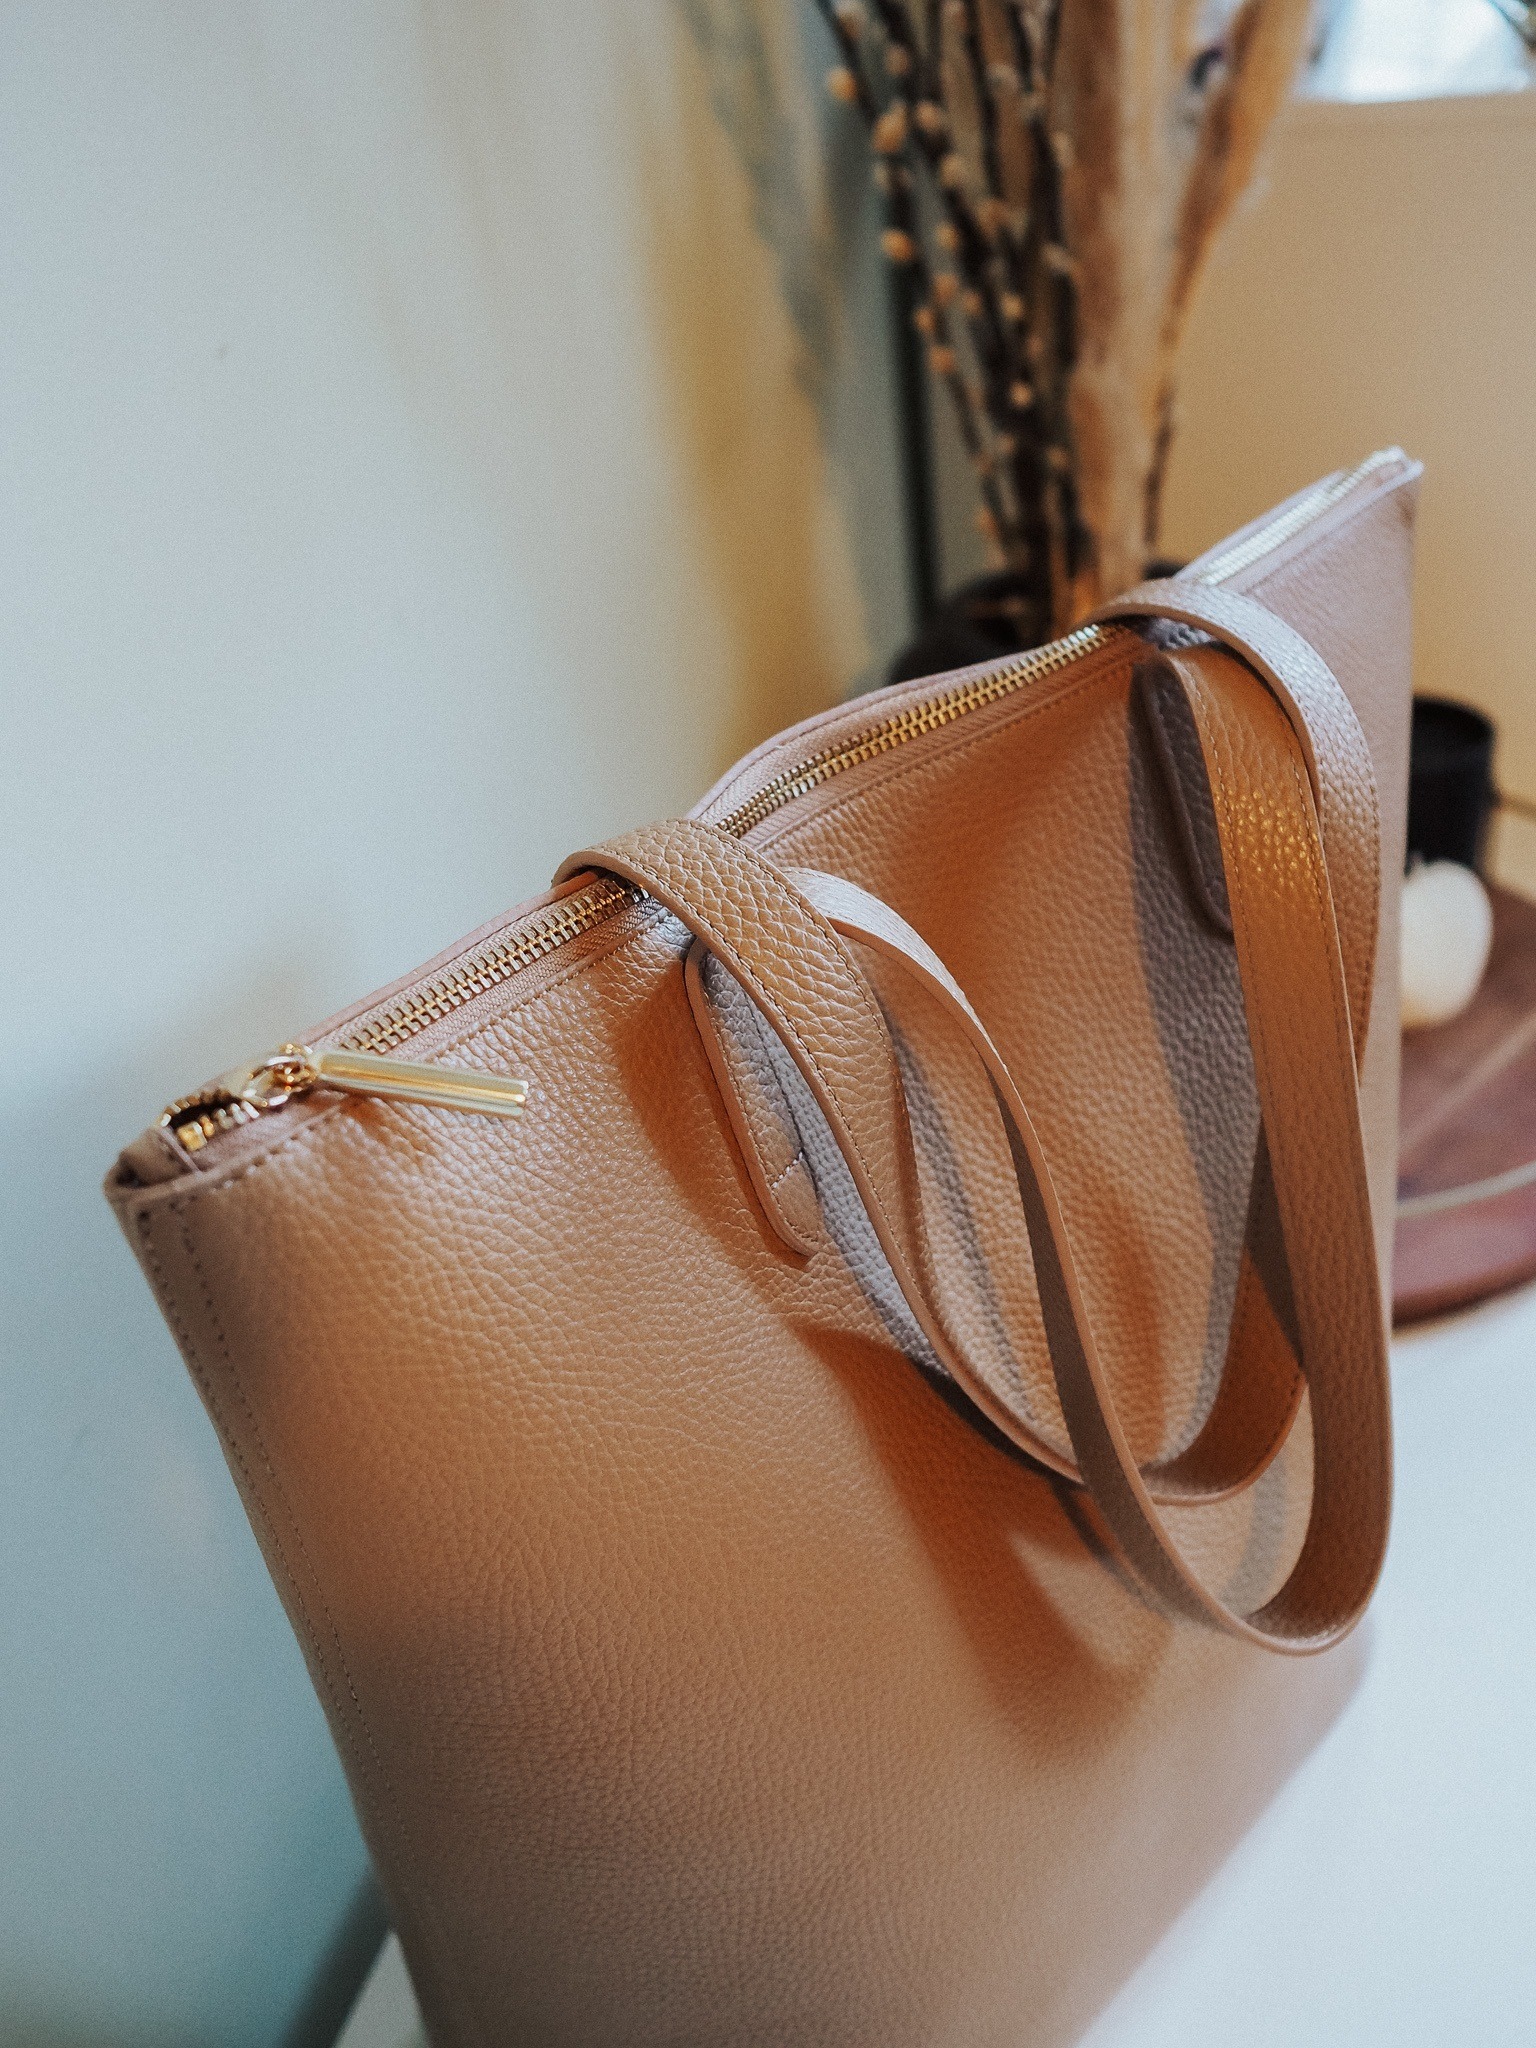 Cuyana Tall Structured Zipper Tote Review - by Kelsey Boyanzhu